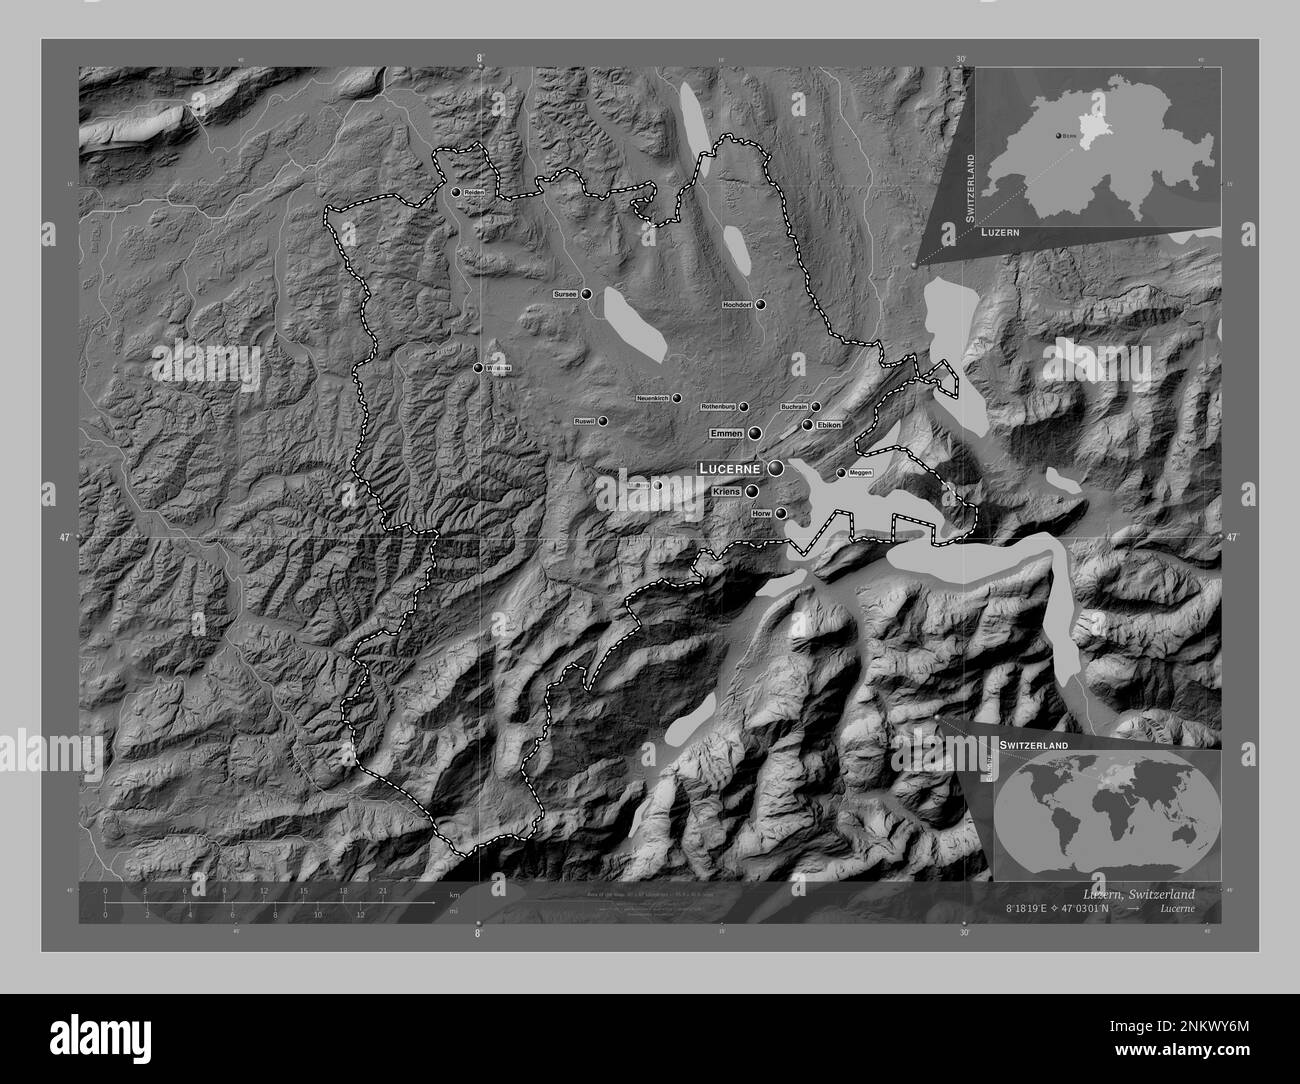 Luzern, canton of Switzerland. Grayscale elevation map with lakes and rivers. Locations and names of major cities of the region. Corner auxiliary loca Stock Photo